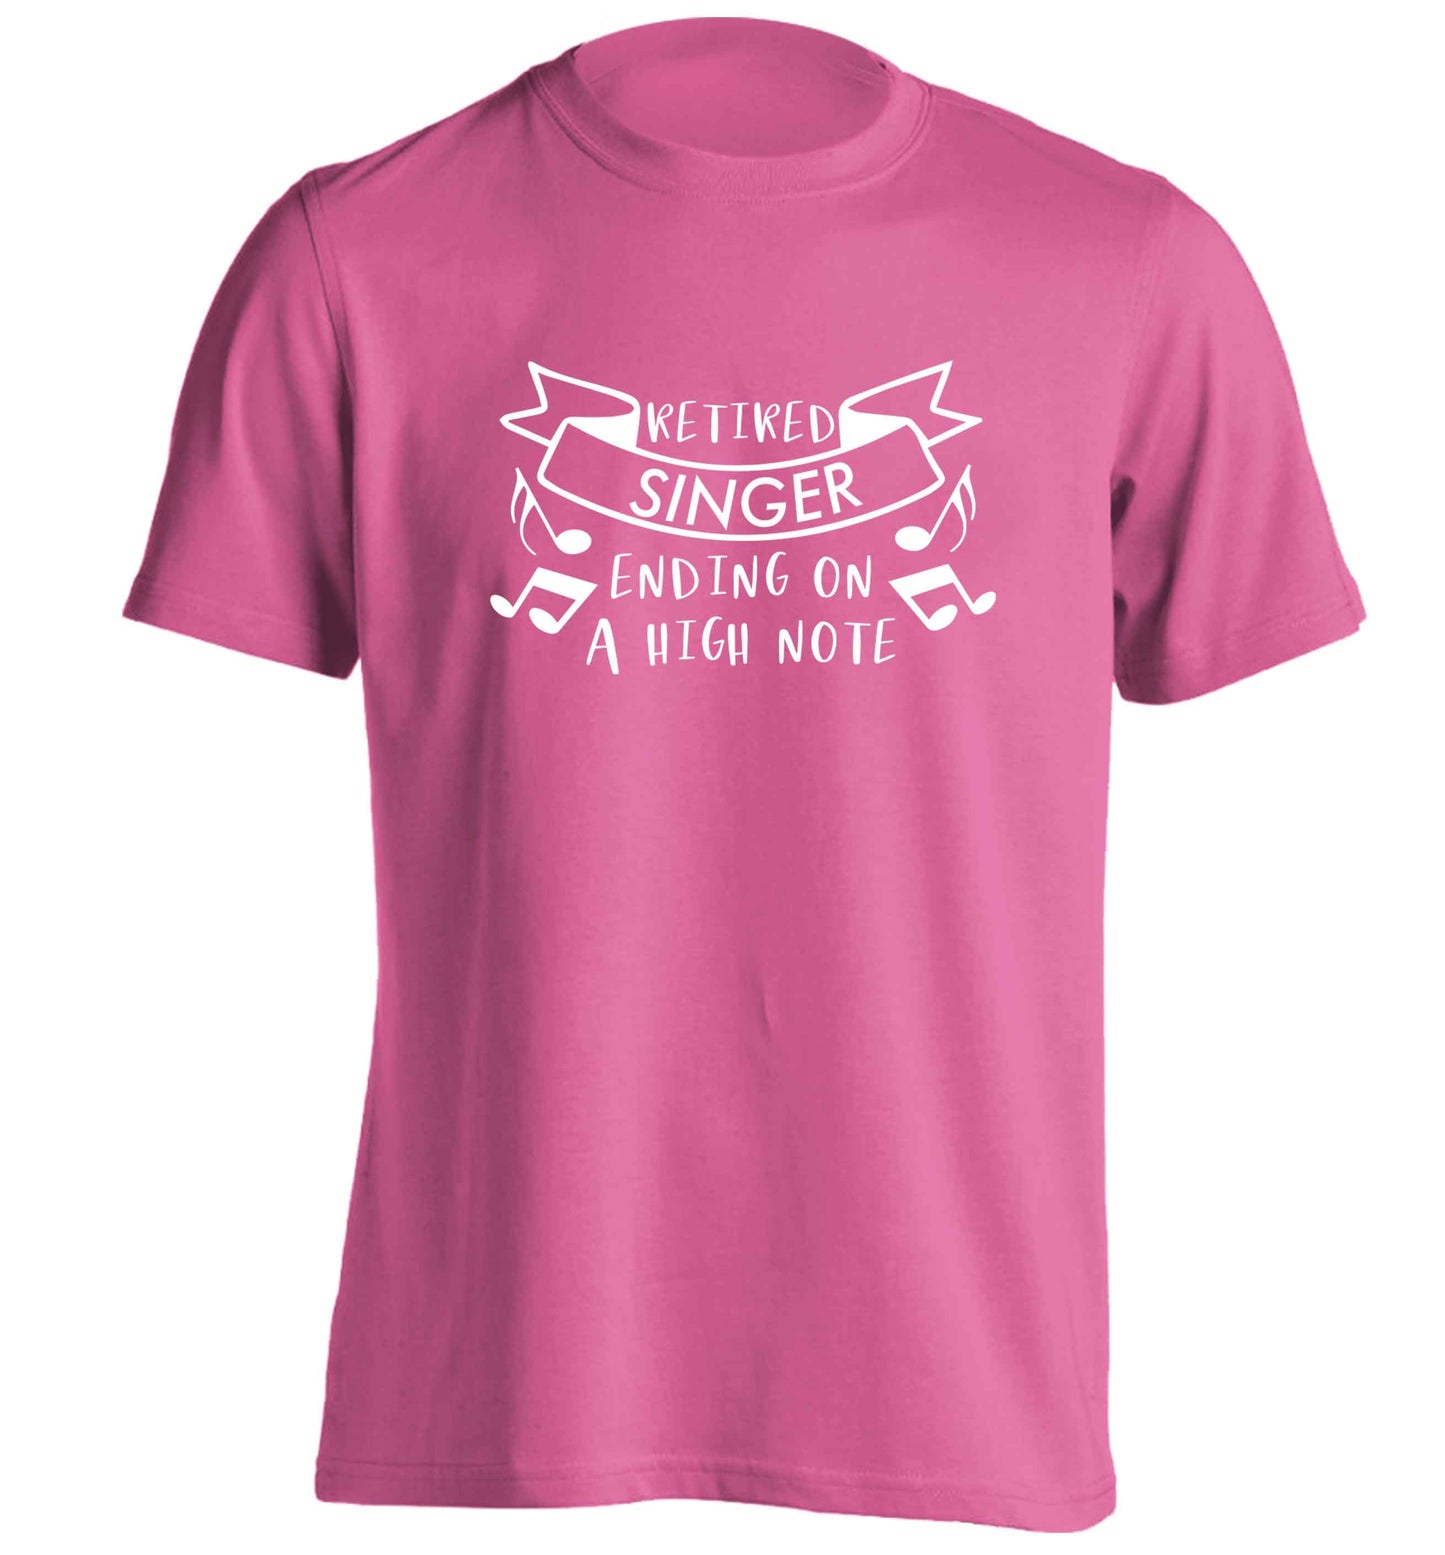 Retired singer ending on a high note adults unisex pink Tshirt 2XL